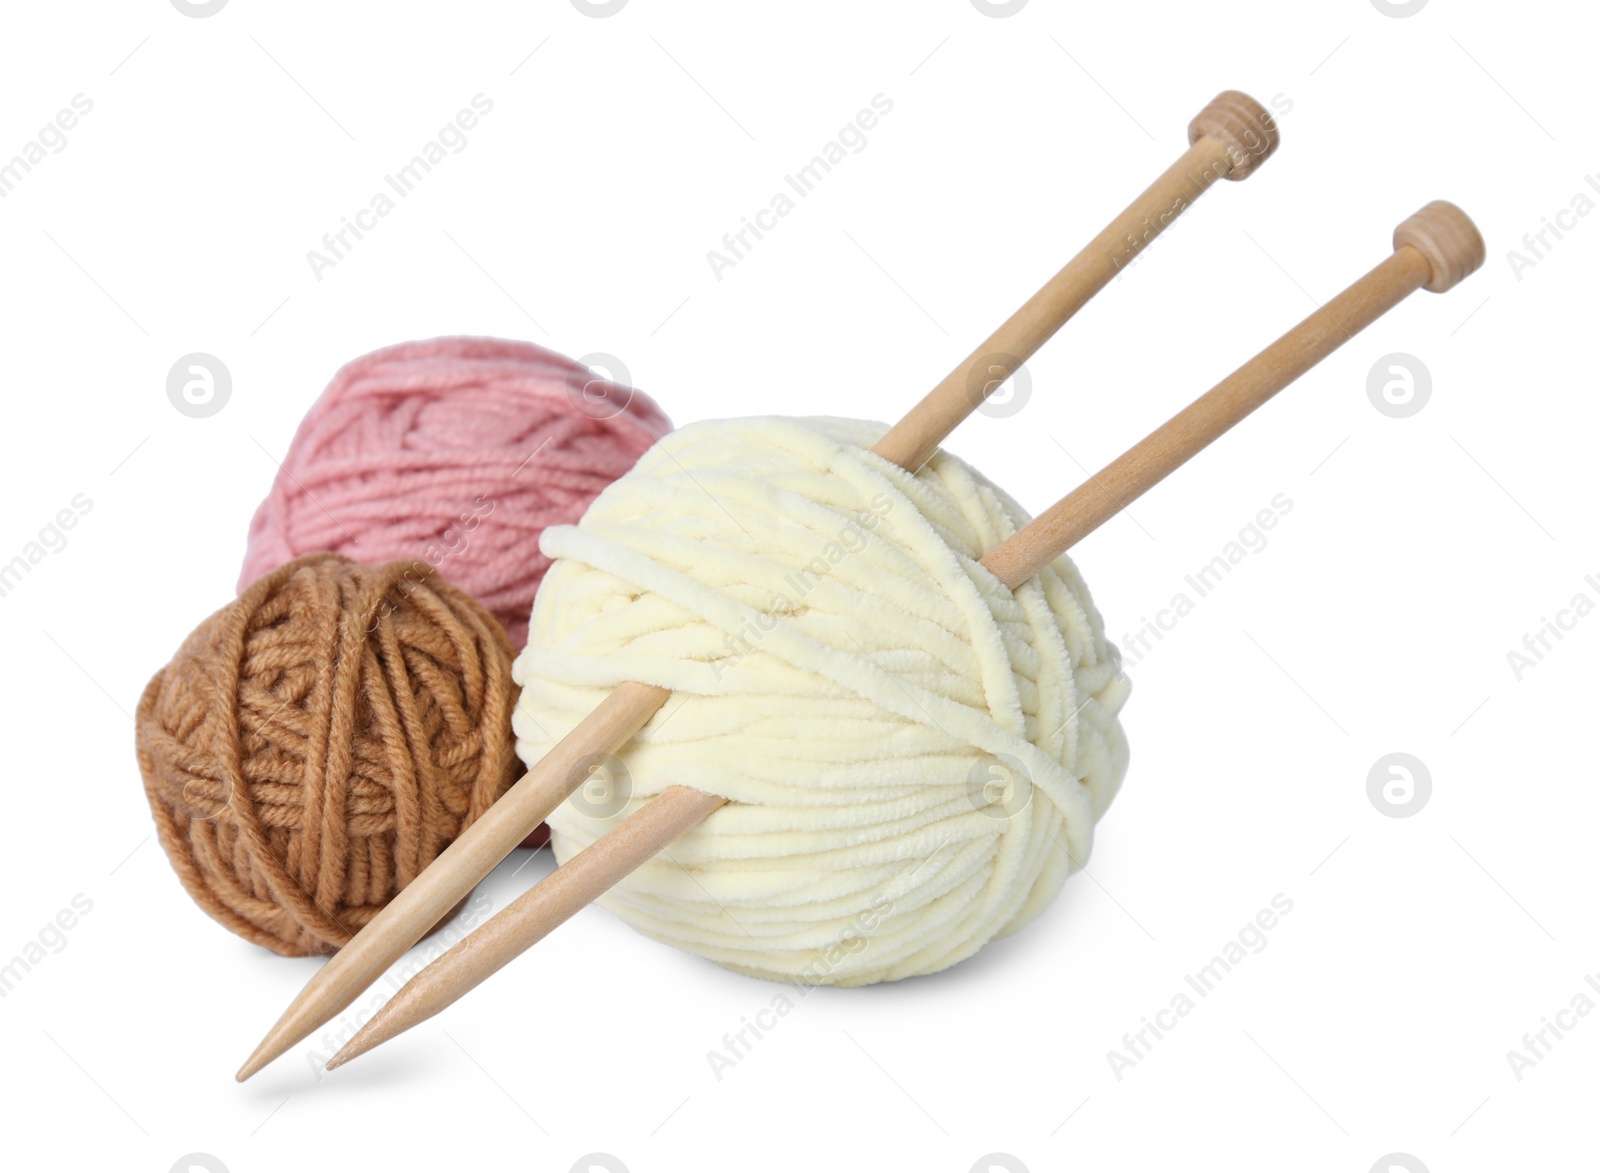 Photo of Soft woolen yarns and knitting needles on white background